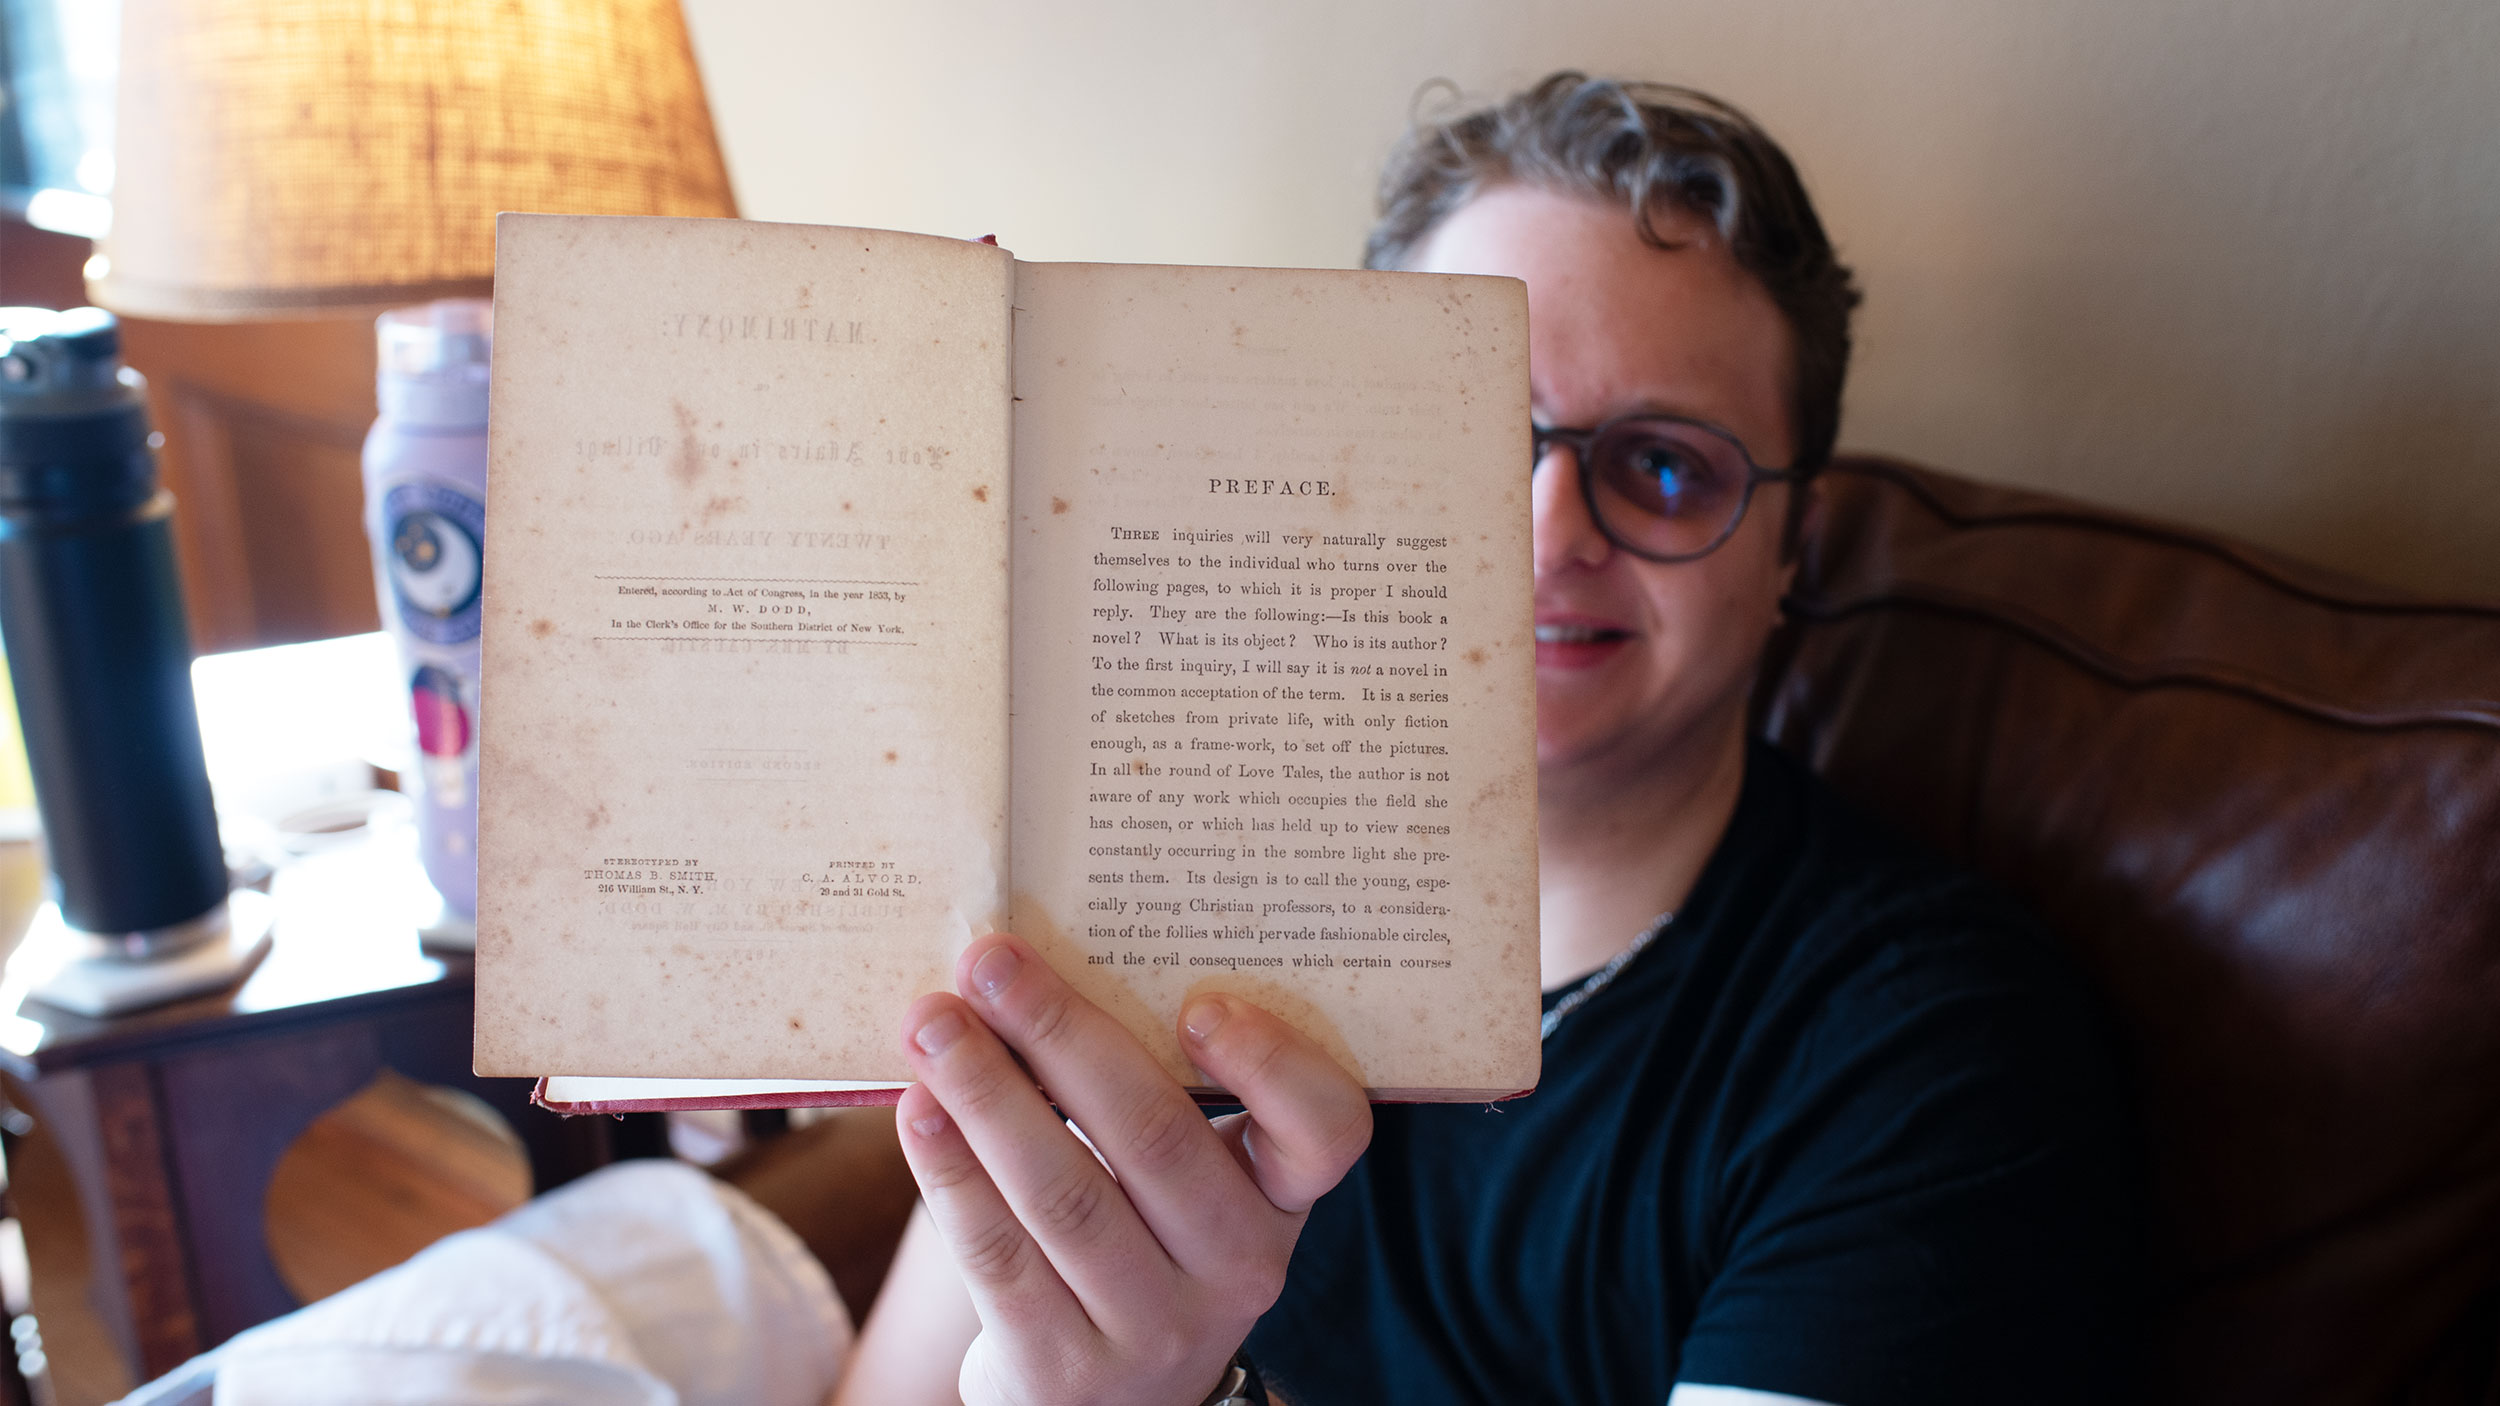 student holds an old warped book open for a close up look